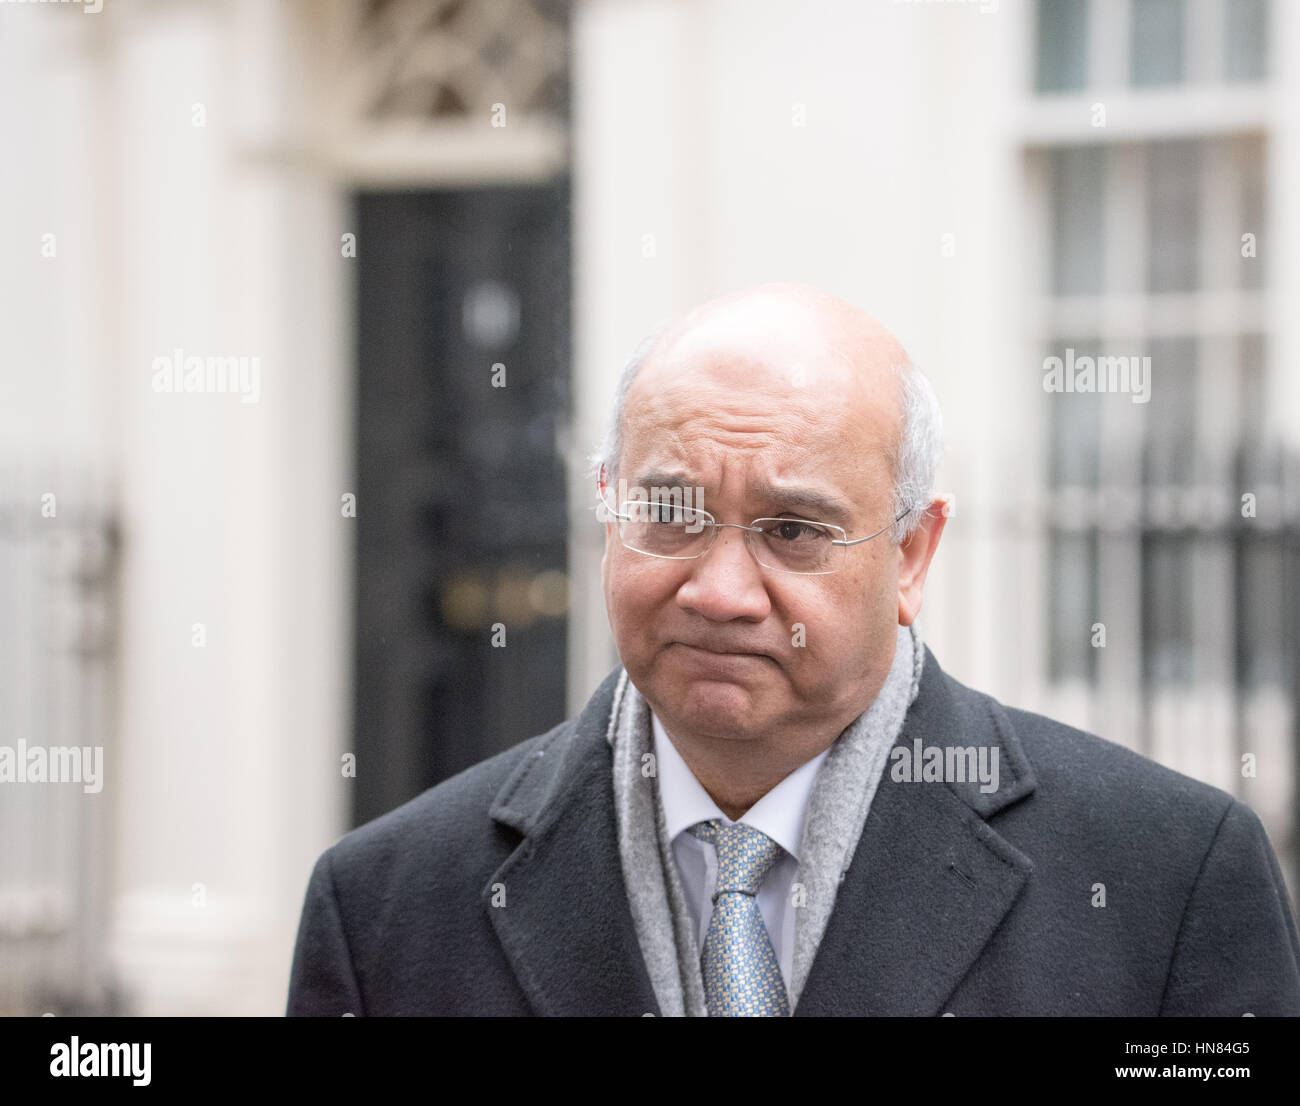 London, UK. 9th February 2017. Protesters hand a petition to 10 Downing Street against the closure of Glenfields Childrens Heart unit. with MP Keith Vaz Credit: Ian Davidson/Alamy Live News Stock Photo